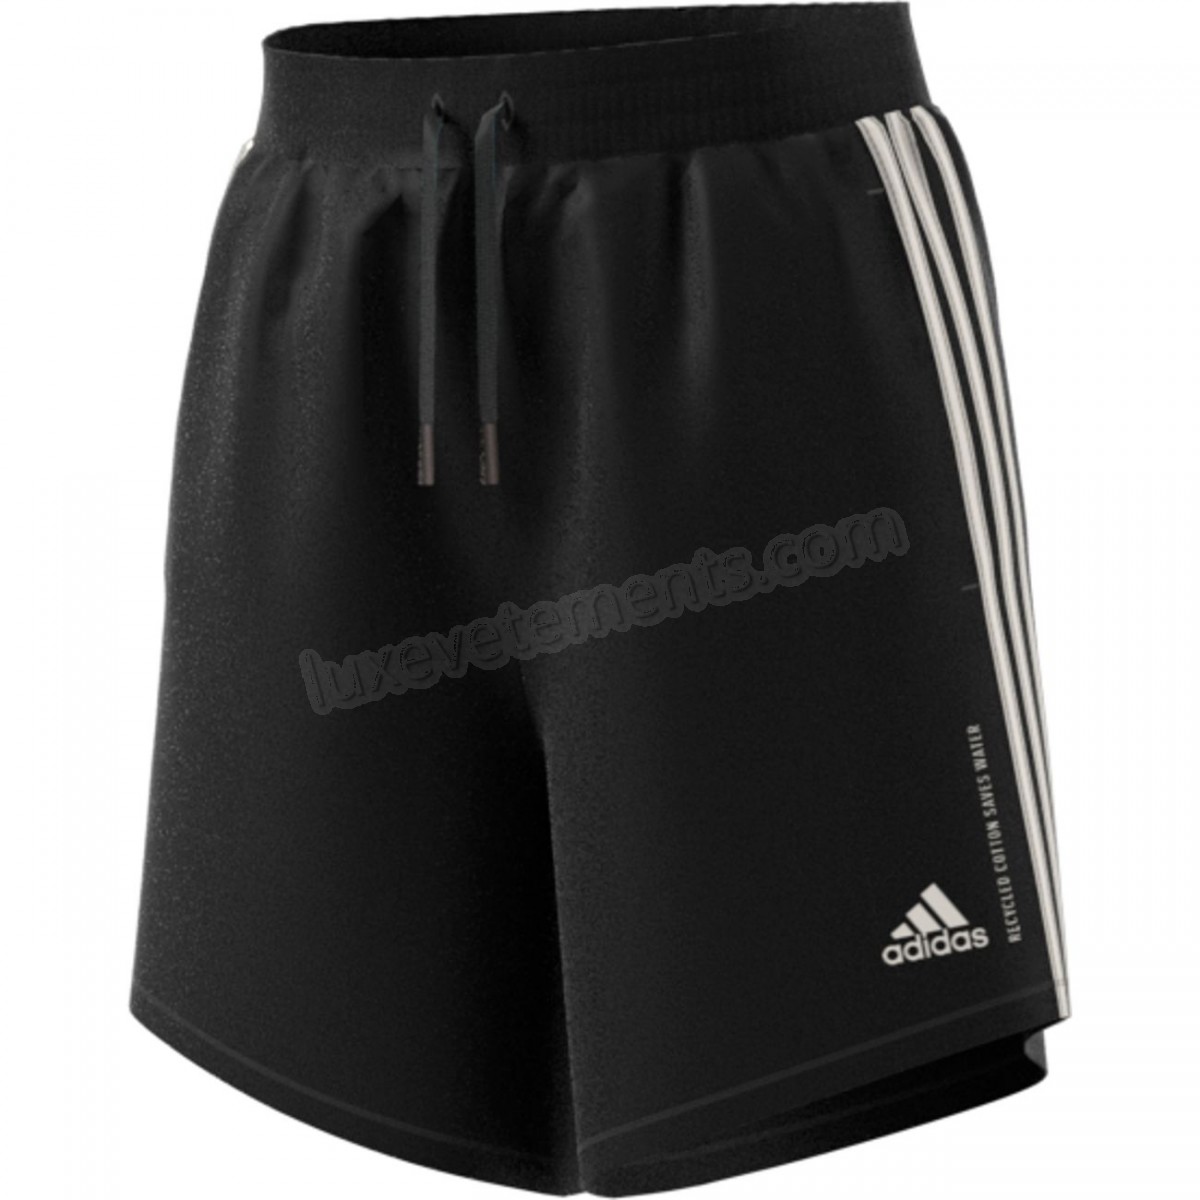 Adidas-Fitness femme ADIDAS Short femme adidas Must Haves Recycled Cotton Vente en ligne - -3